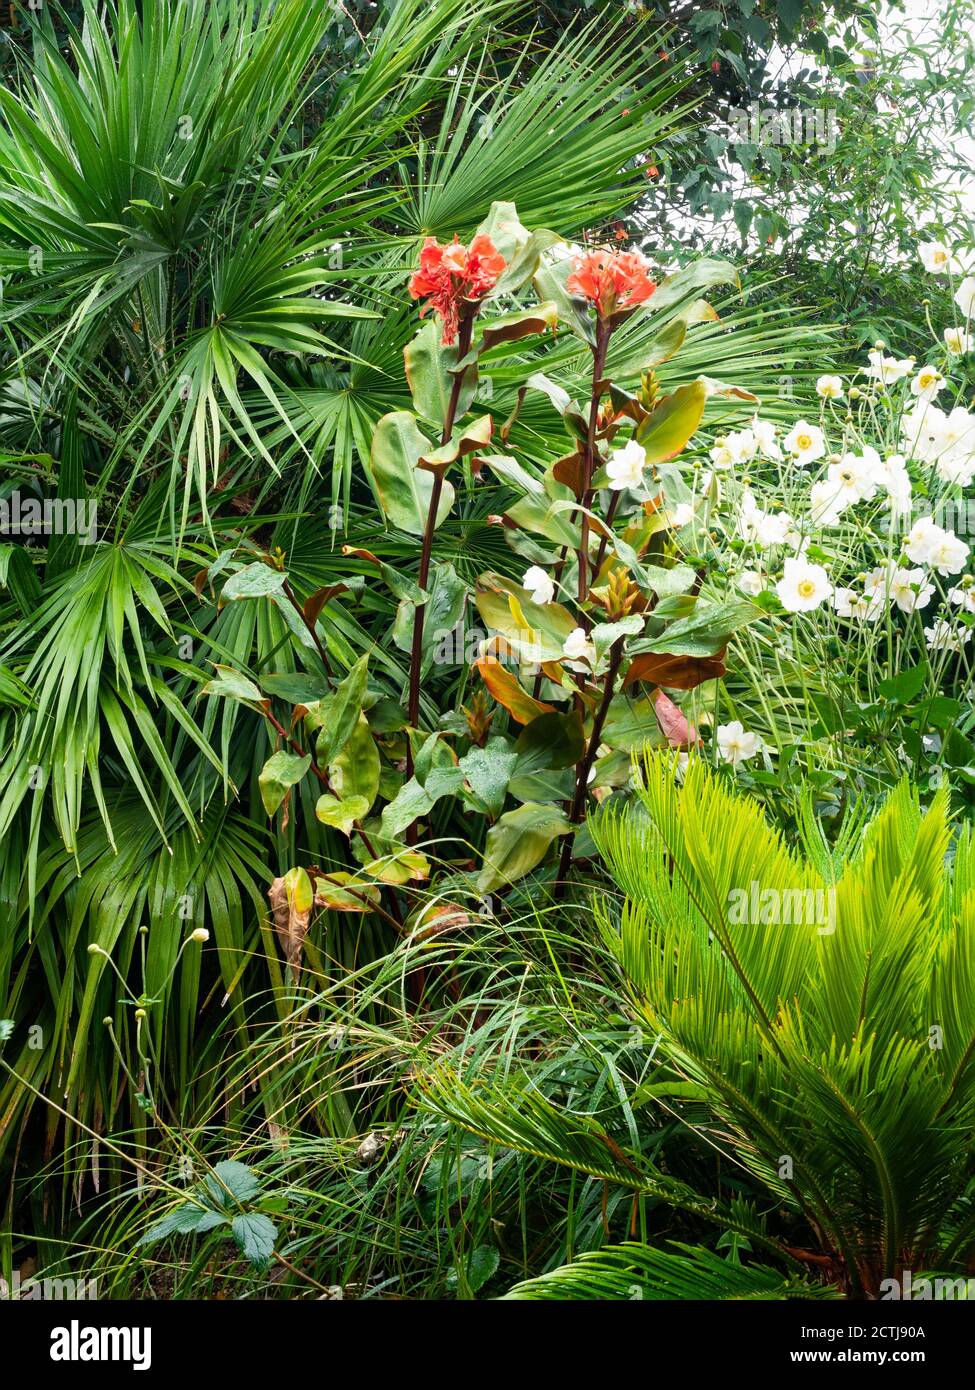 Early autumn colour in a small exotic UK garden with Hedychium greenii,Cycas revoluta and Anemone 'Honorine Jobert' with a Chamaerops humilis fan palm Stock Photo